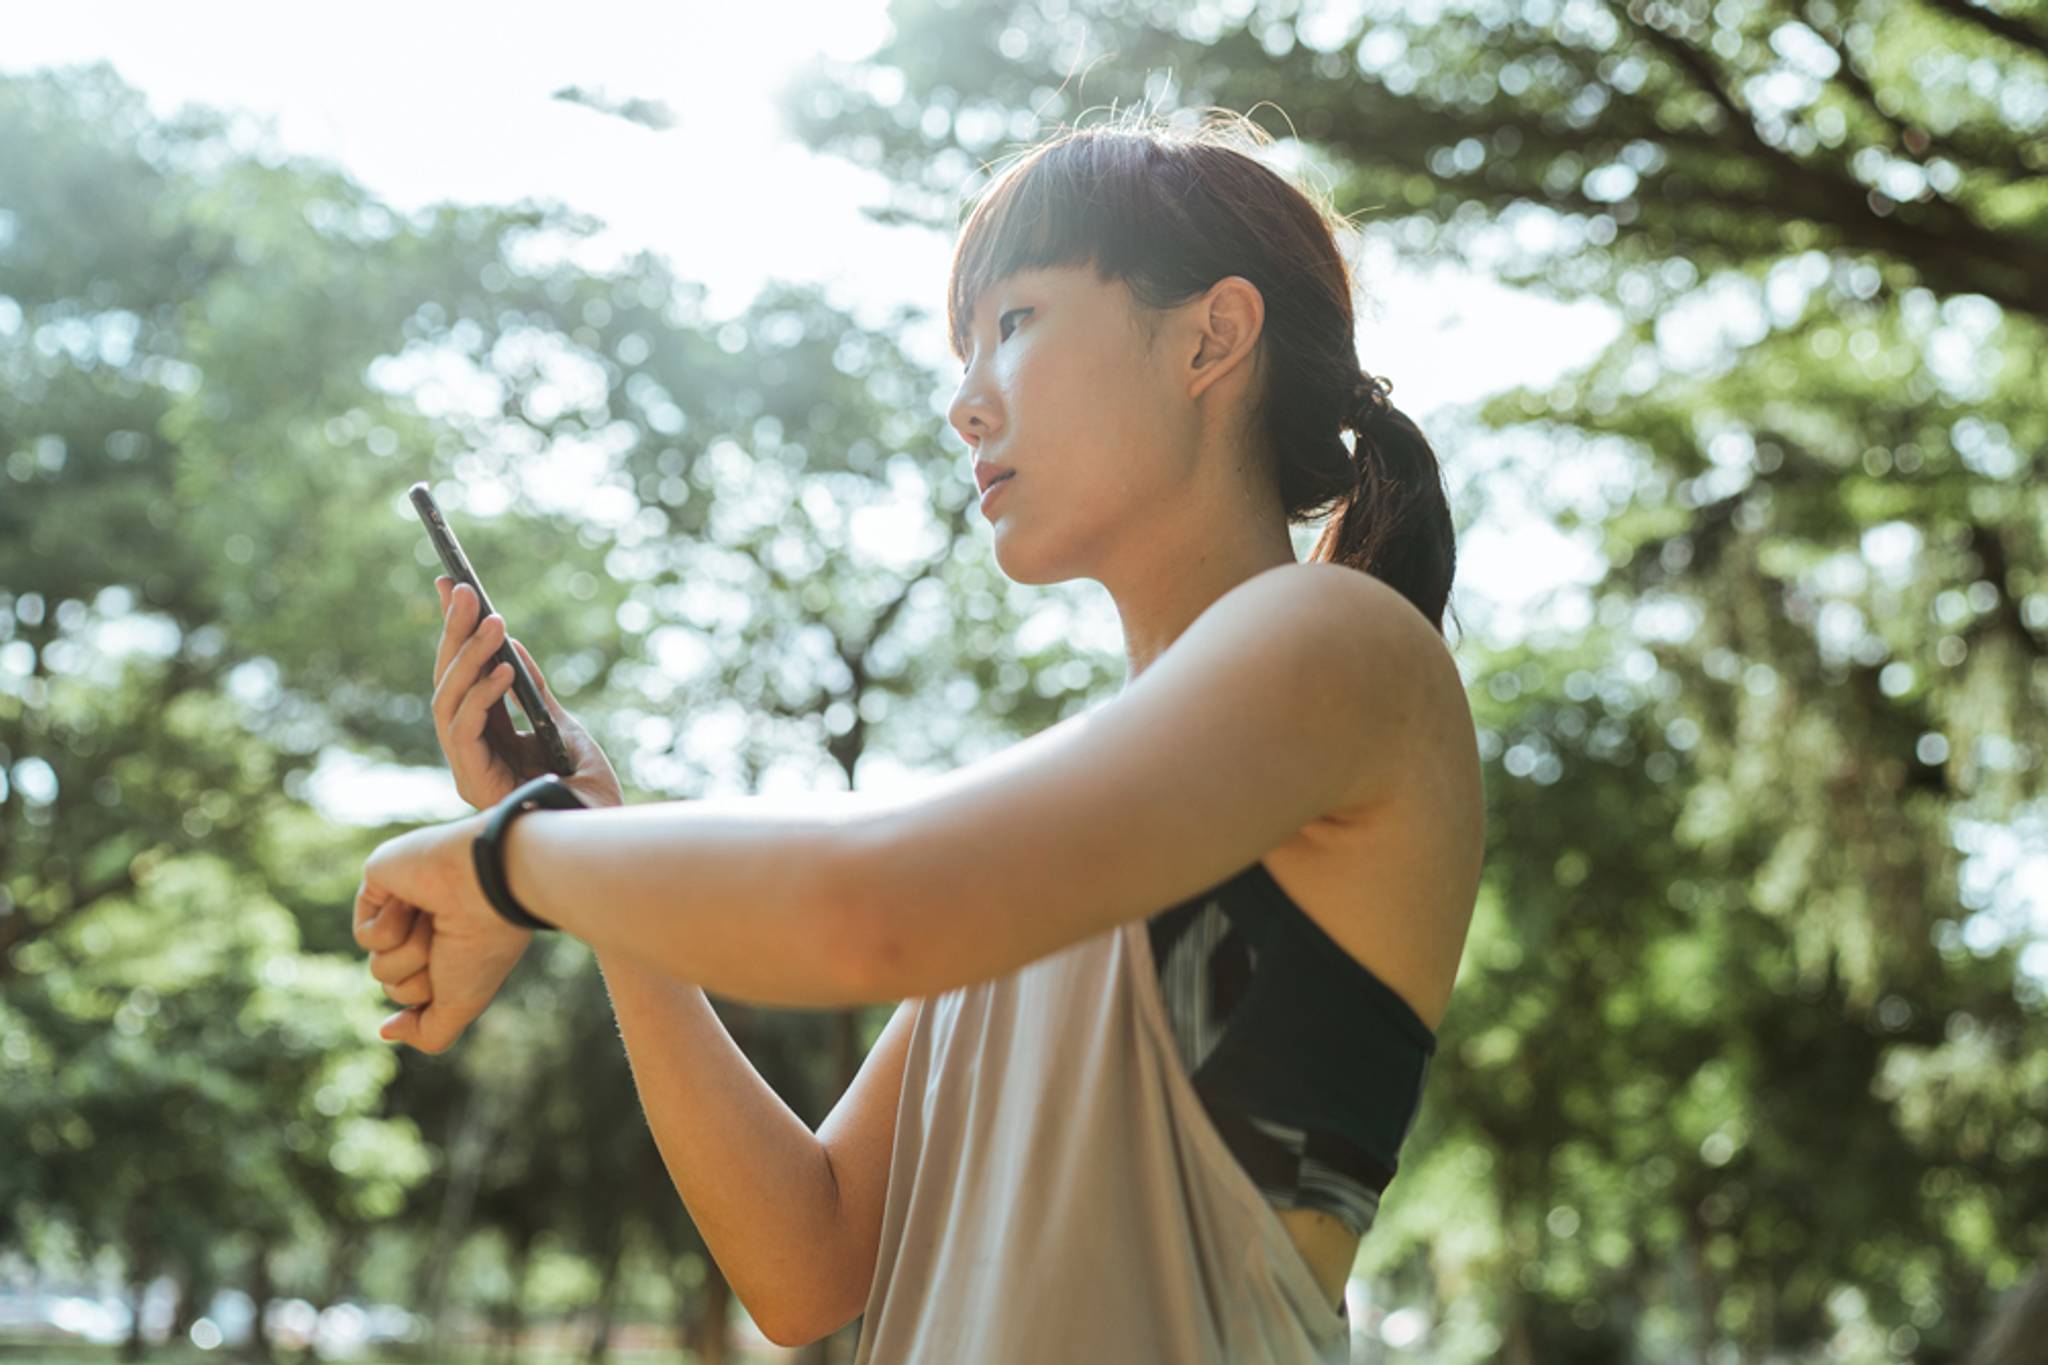 Why fitness fans are opting for an omnichannel blend